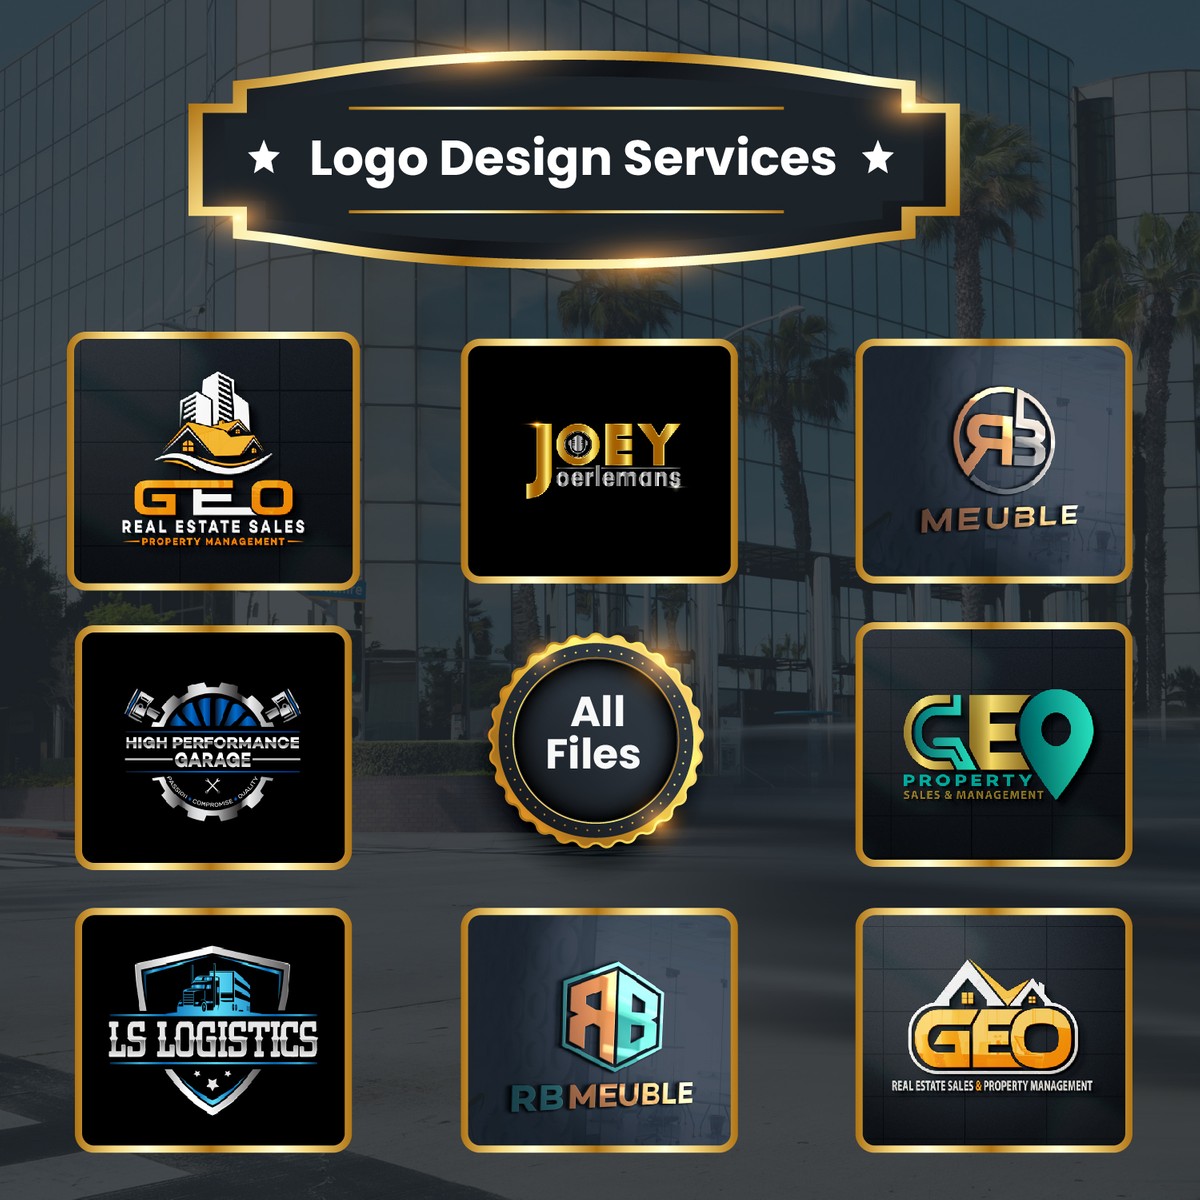 Bring your brand to life with our professional design services.